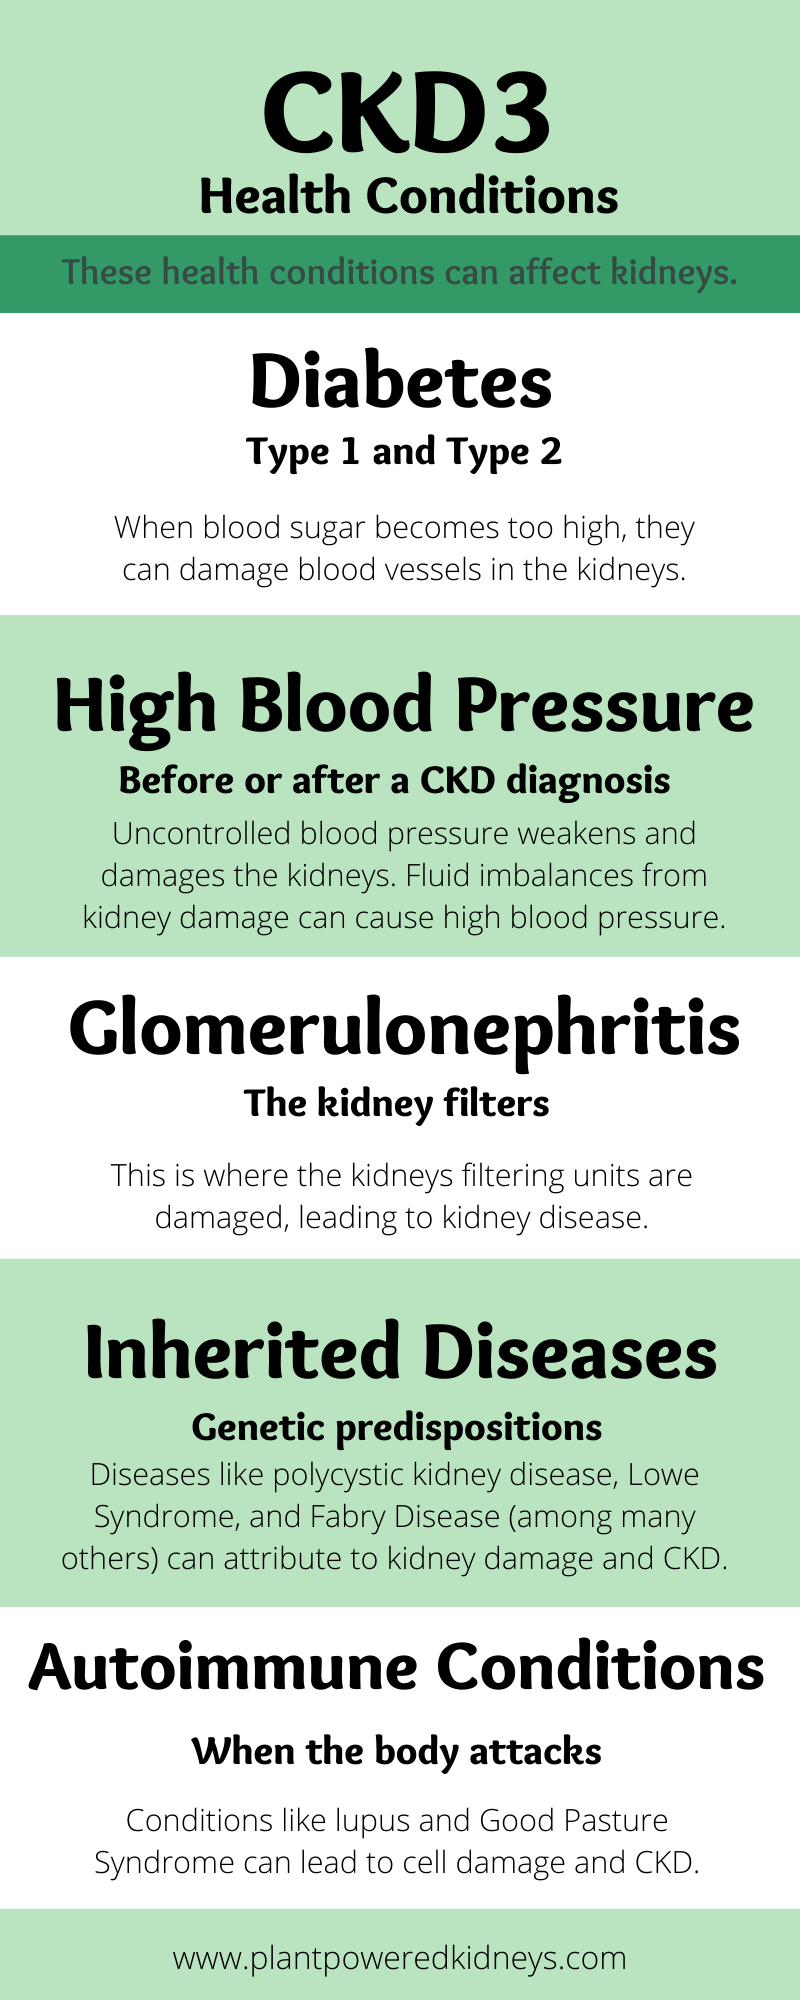 Health Conditions that can affect kidneys
1) Diabetes type 1 and type 2. When blood sugar becomes too high, they can damage blood vessels in the kidneys.

2) High blood pressure. Uncontrolled blood pressure weakens and damages the kidneys. Fluid imbalances from kidney damage can cause high blood pressure.

3) Glomerulonephritis. This is where the kidneys filtering units are damaged, leading to kidney disease.

4) Inherited Diseases. Diseases like polycystic kidney disease, Lowe Syndrome, and Fabry Disease (among many others) can attribute to kidney damage and CKD.

5) Autoimmune Conditions. Conditions like lupus and Good Pasture Syndrome can lead to cell damage and CKD.